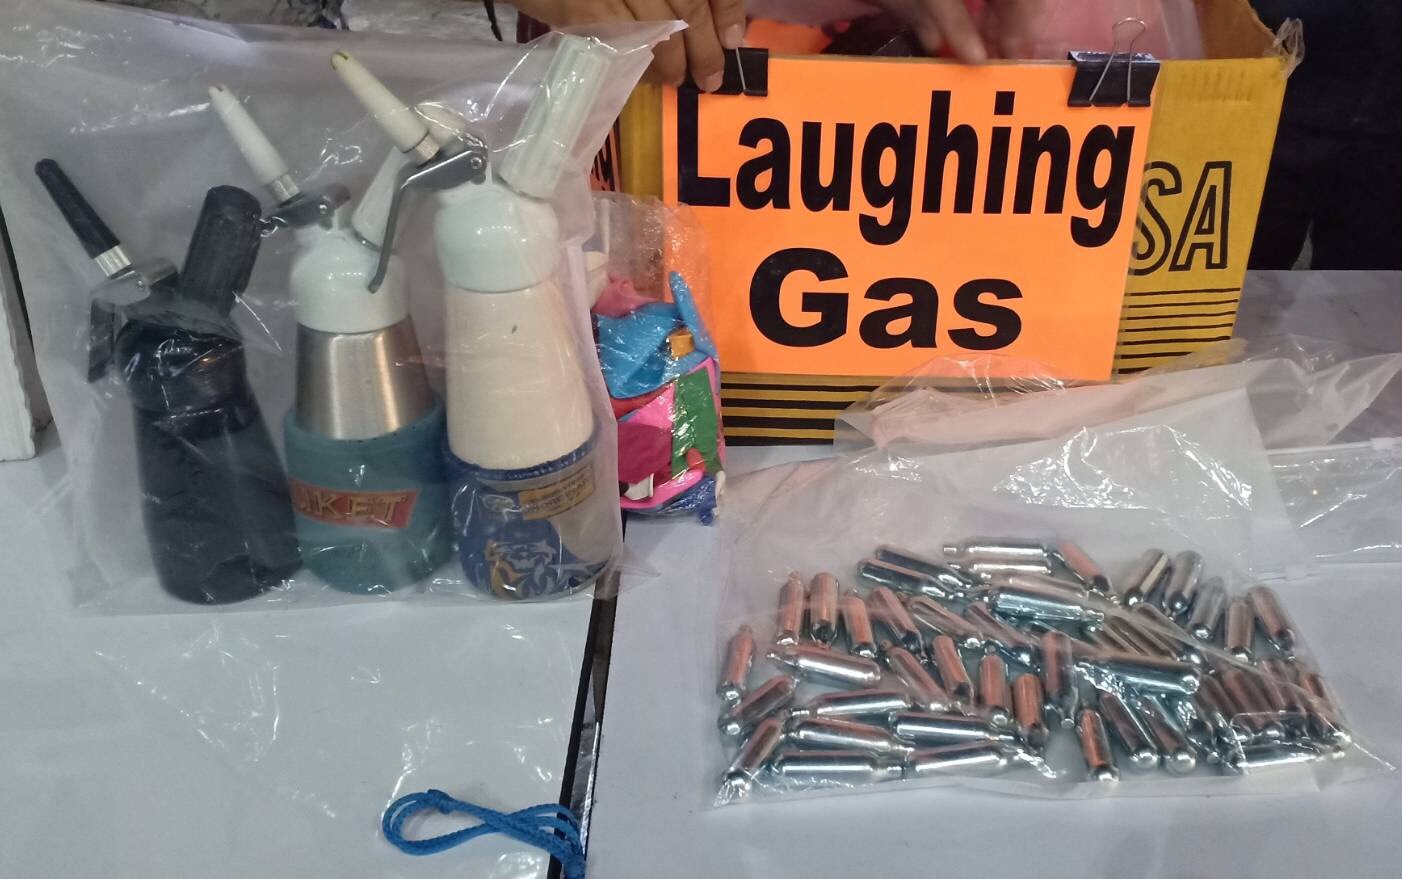 Whipped-cream chargers filled with nitrous oxide were found during the raid on July 11.